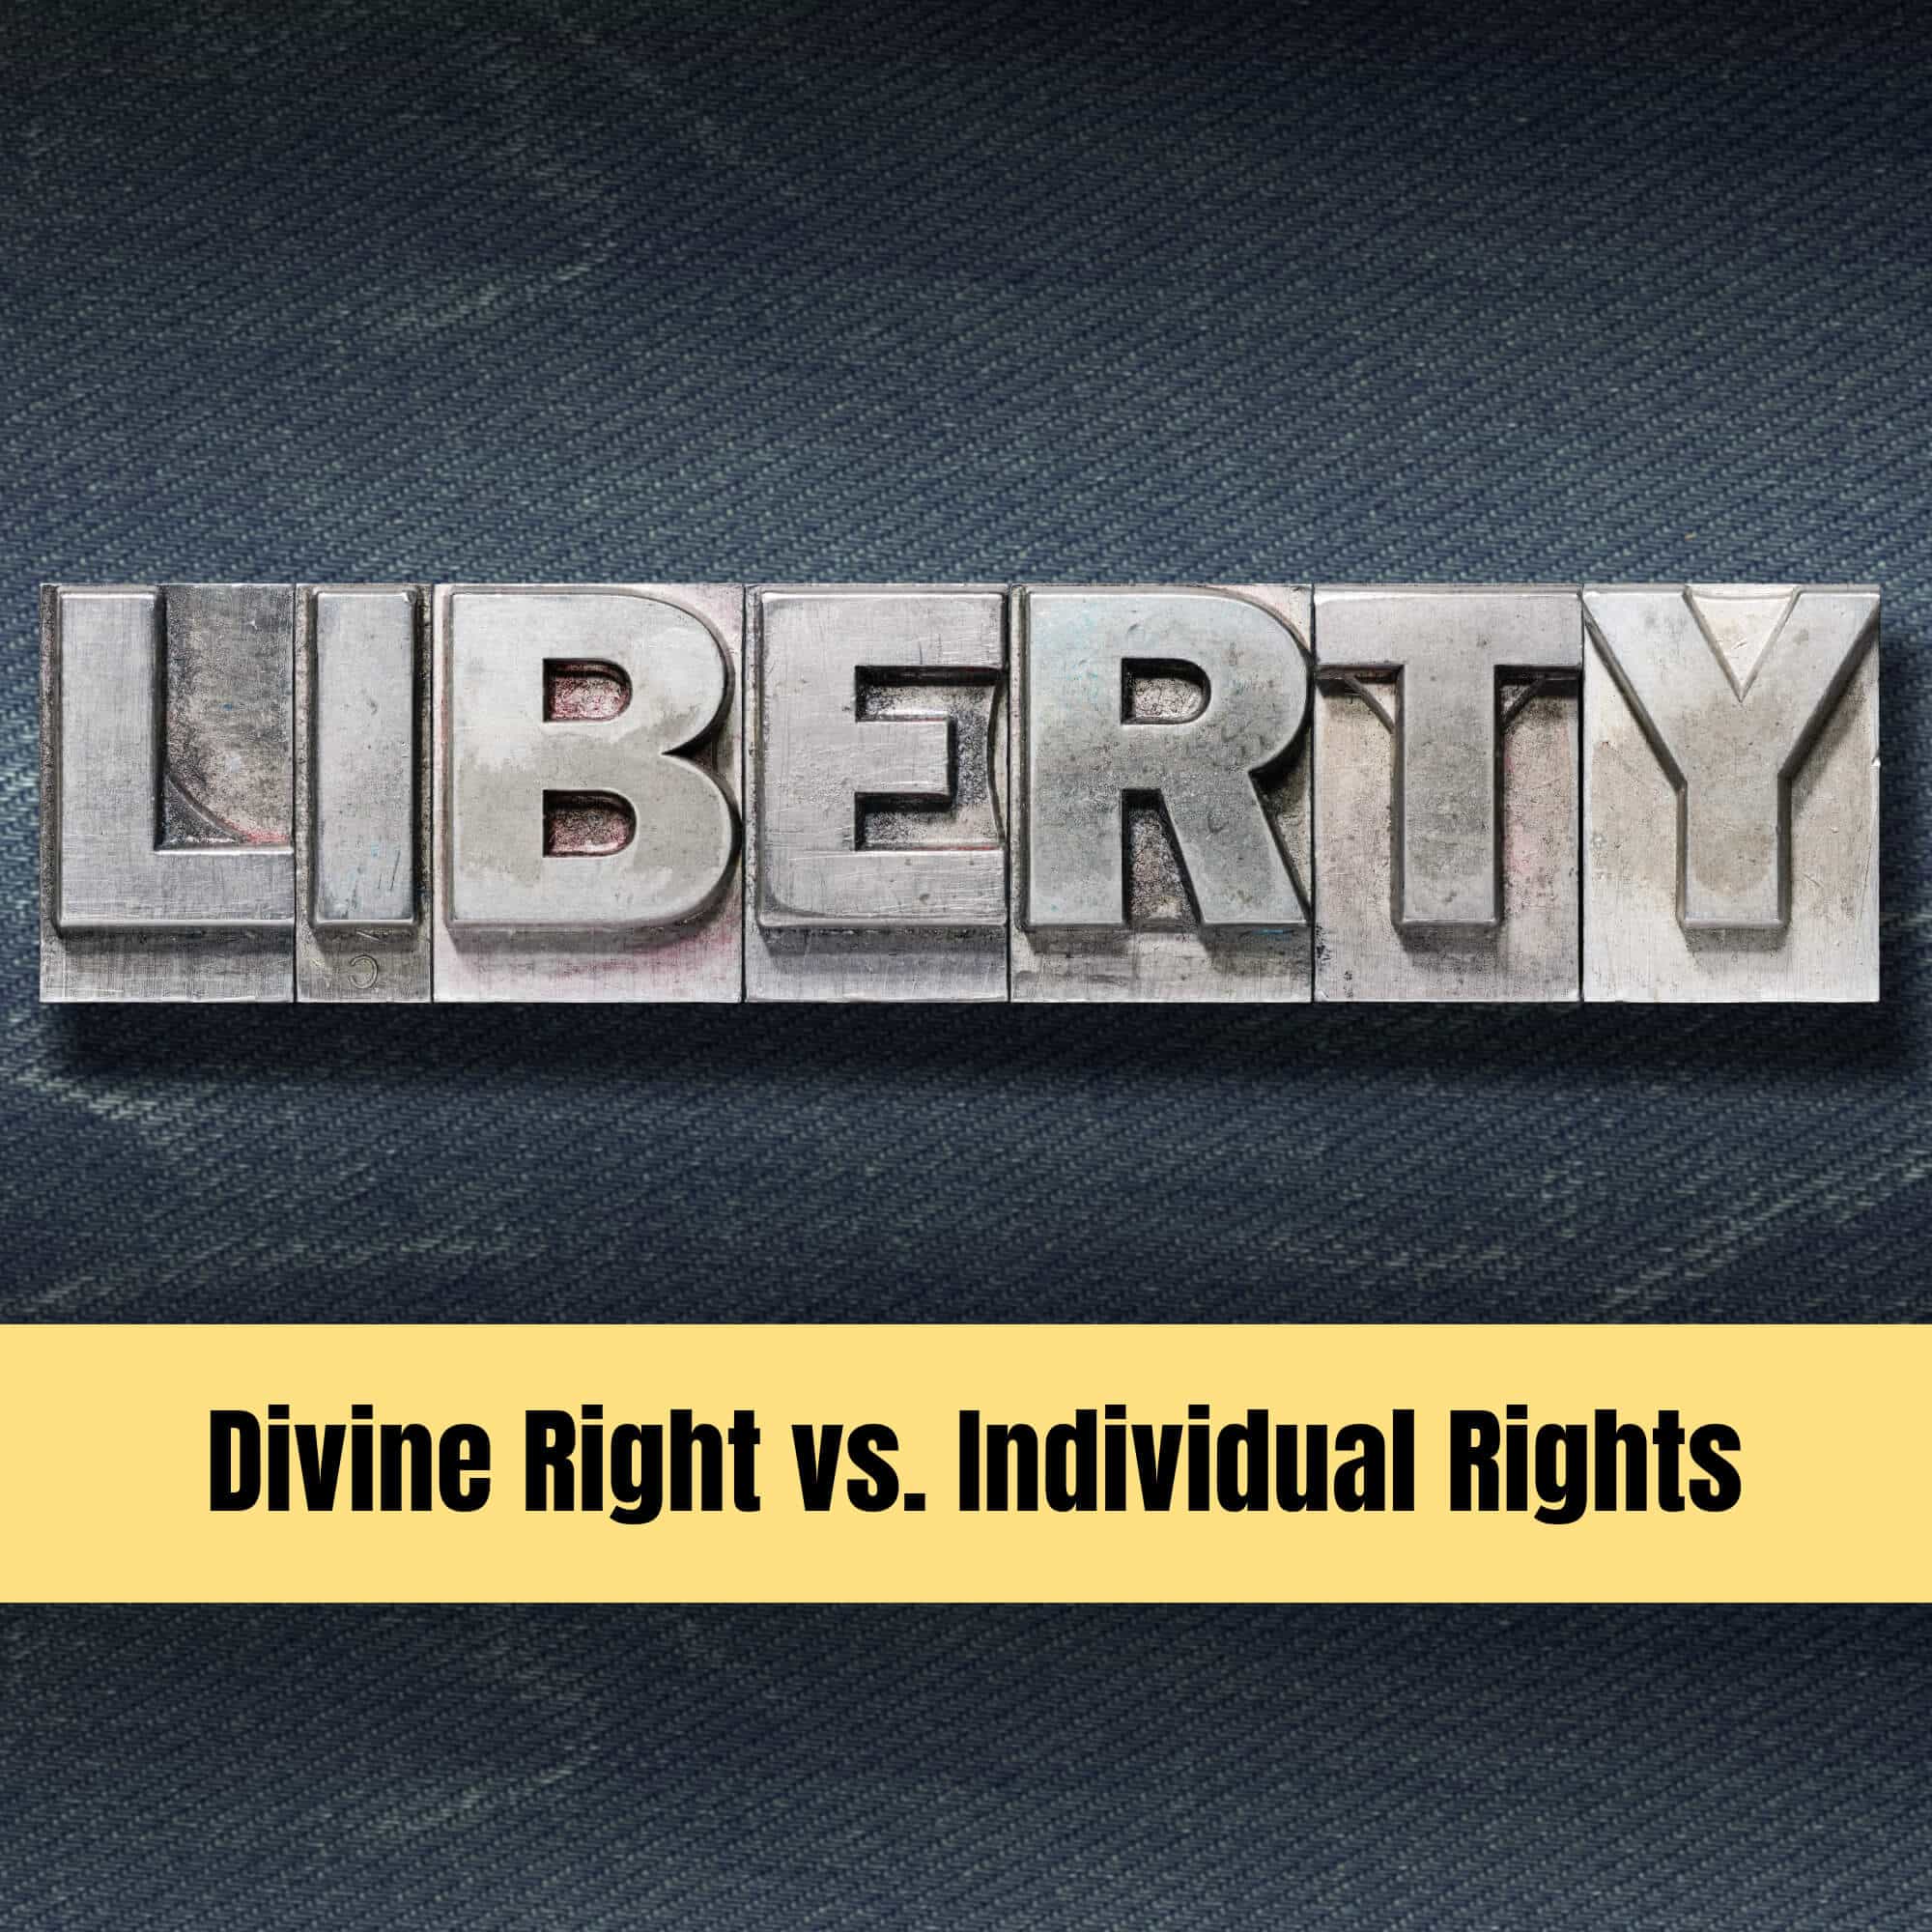 What is Liberty? 3 Views From Divine Right to Individual Rights